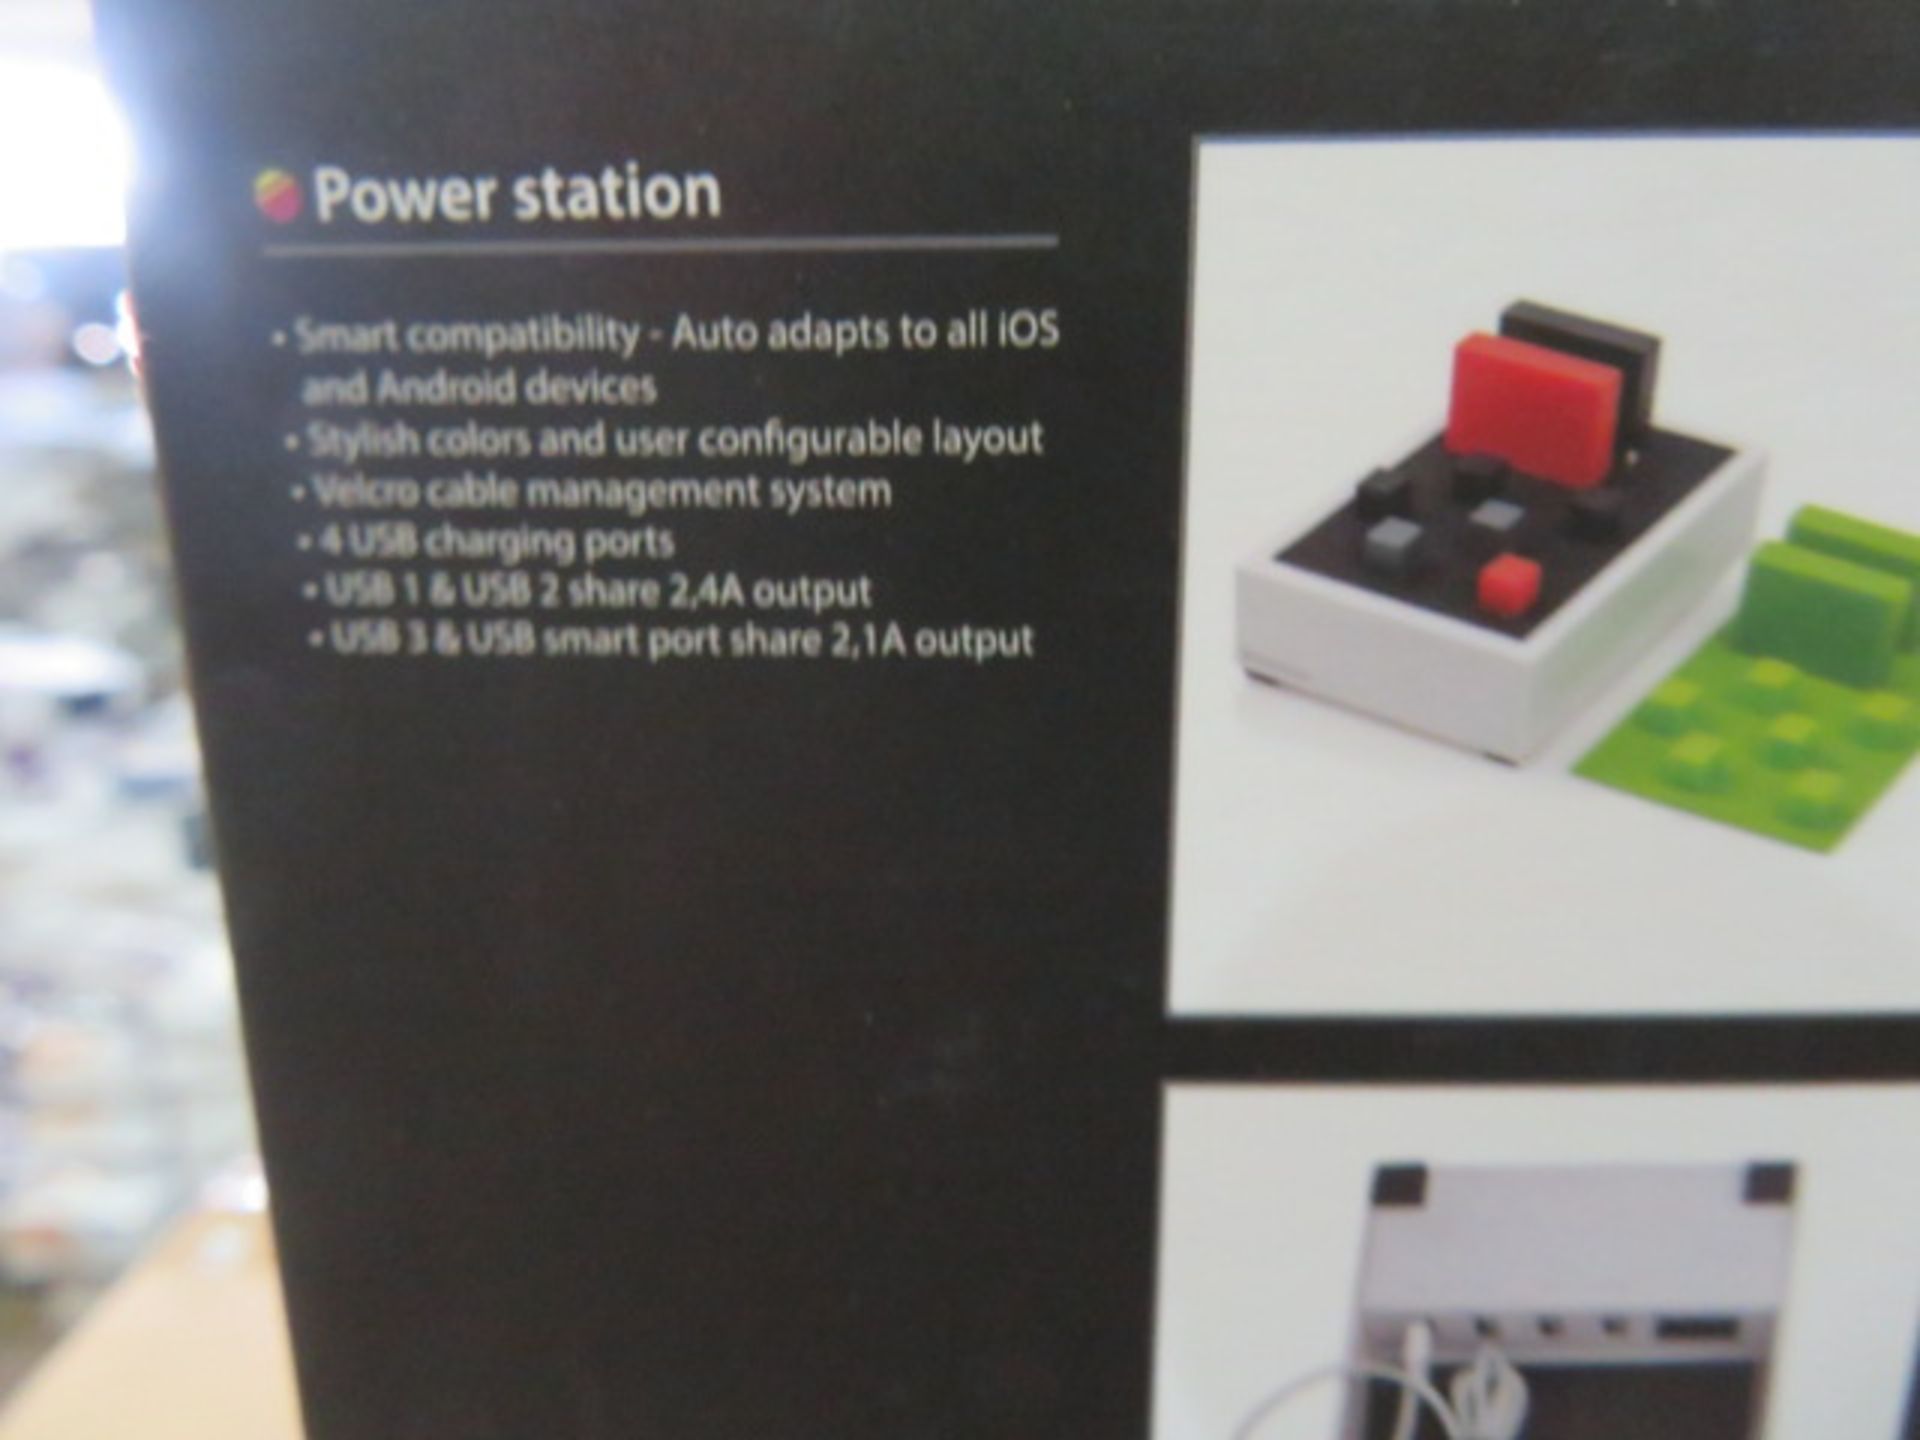 10 X New & Boxed Audio Sonic 4,5A High Power - Power Station. Smart Compatibility - Auto Adapts... - Image 3 of 3